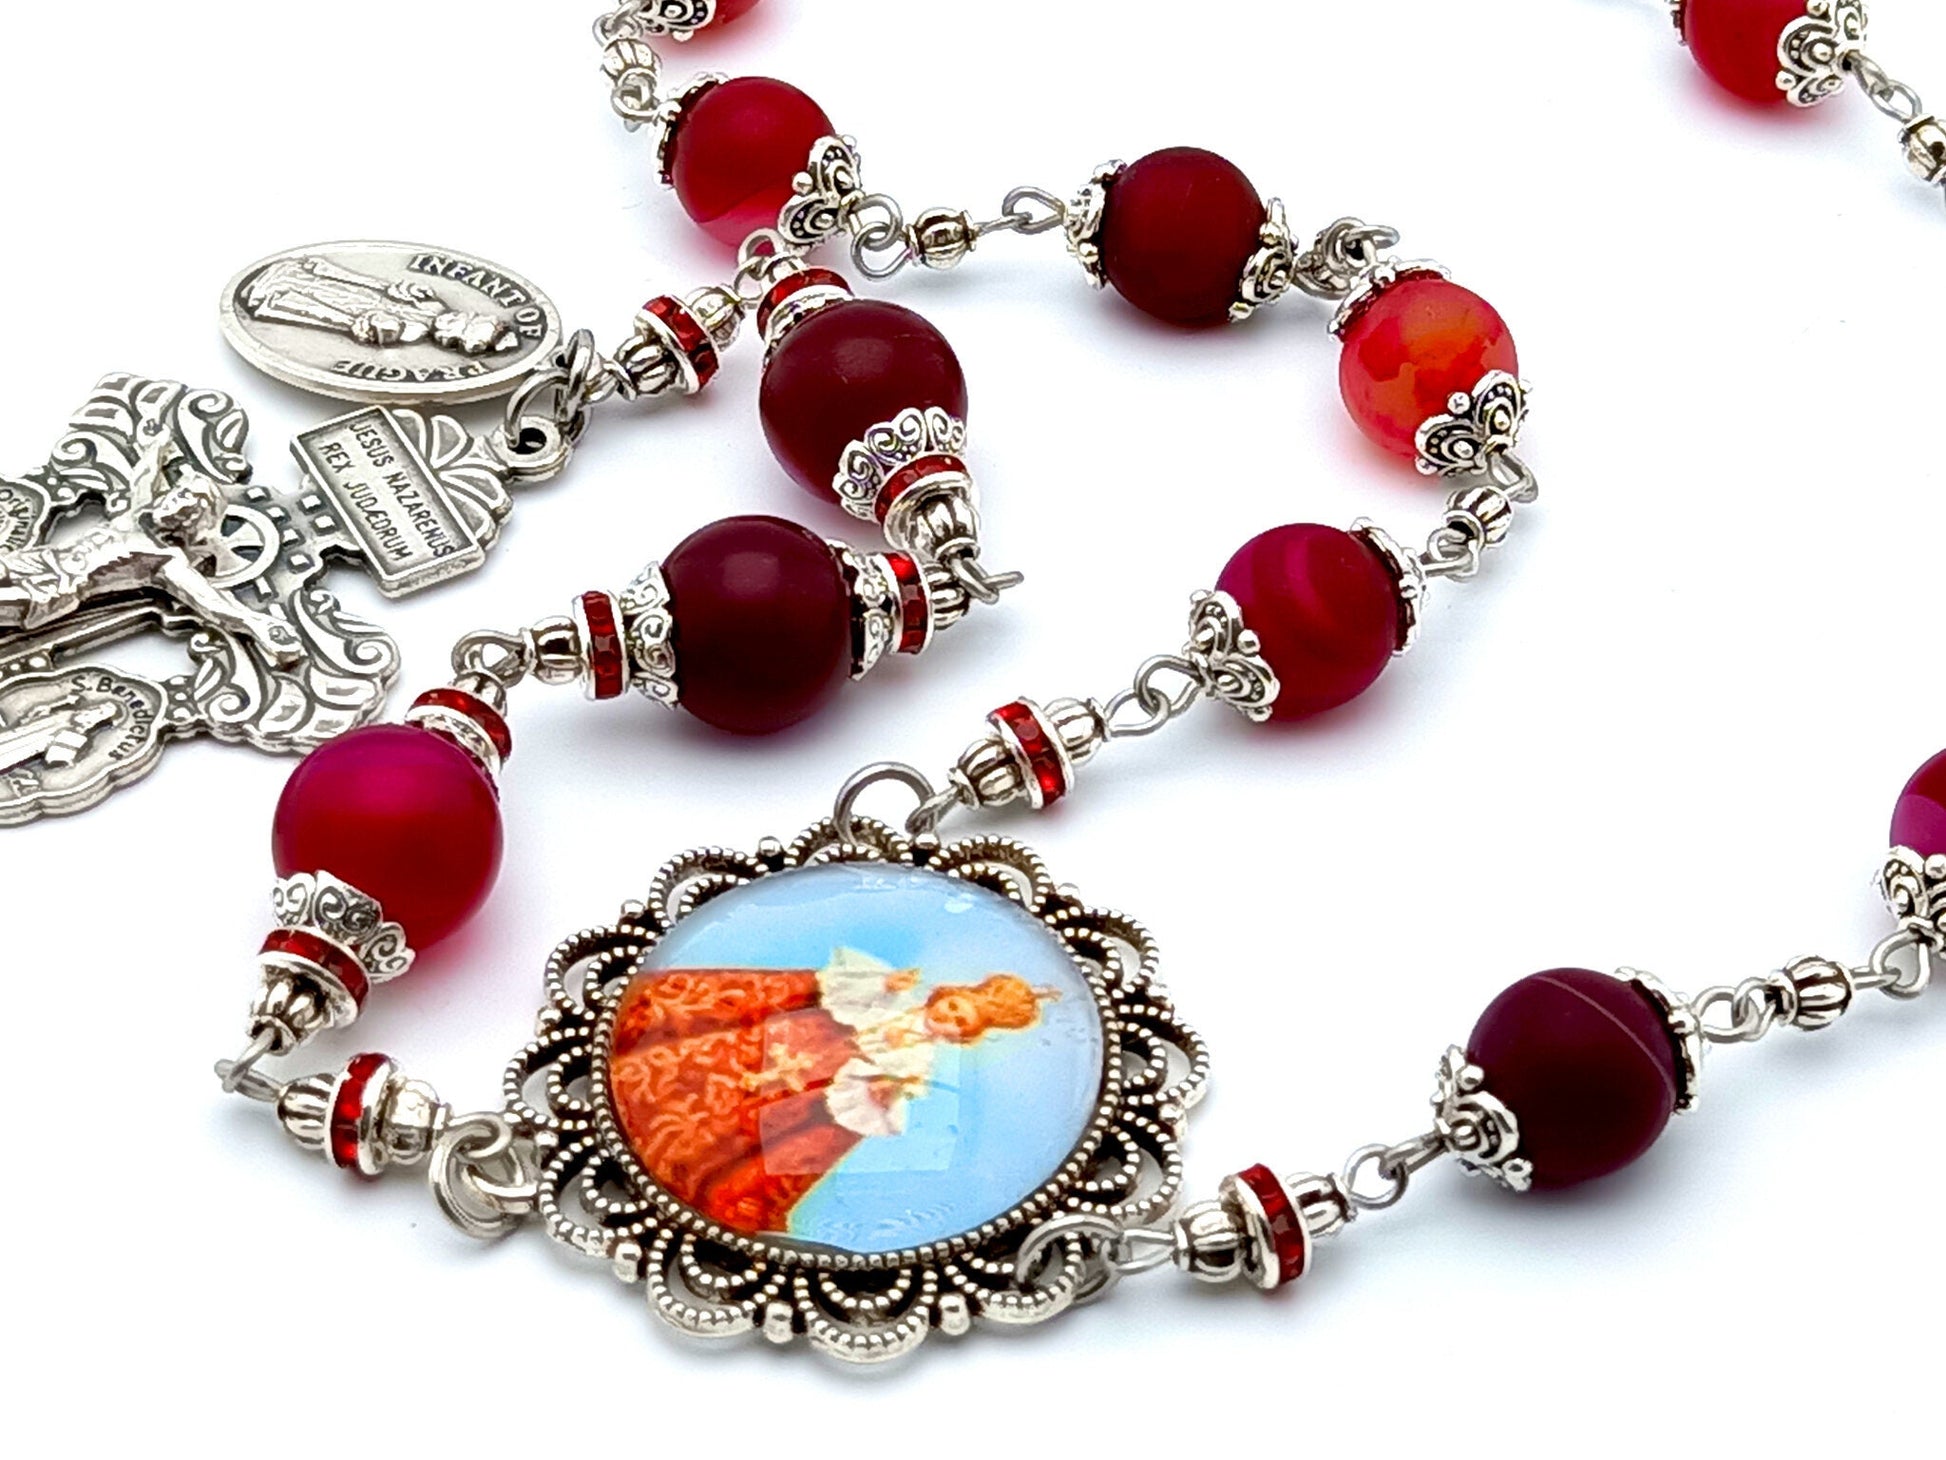 Infant of Prague unique rosary beads prayer chaplet with red agate gemstone beads, silver pardon crucifix and centre picture medal.